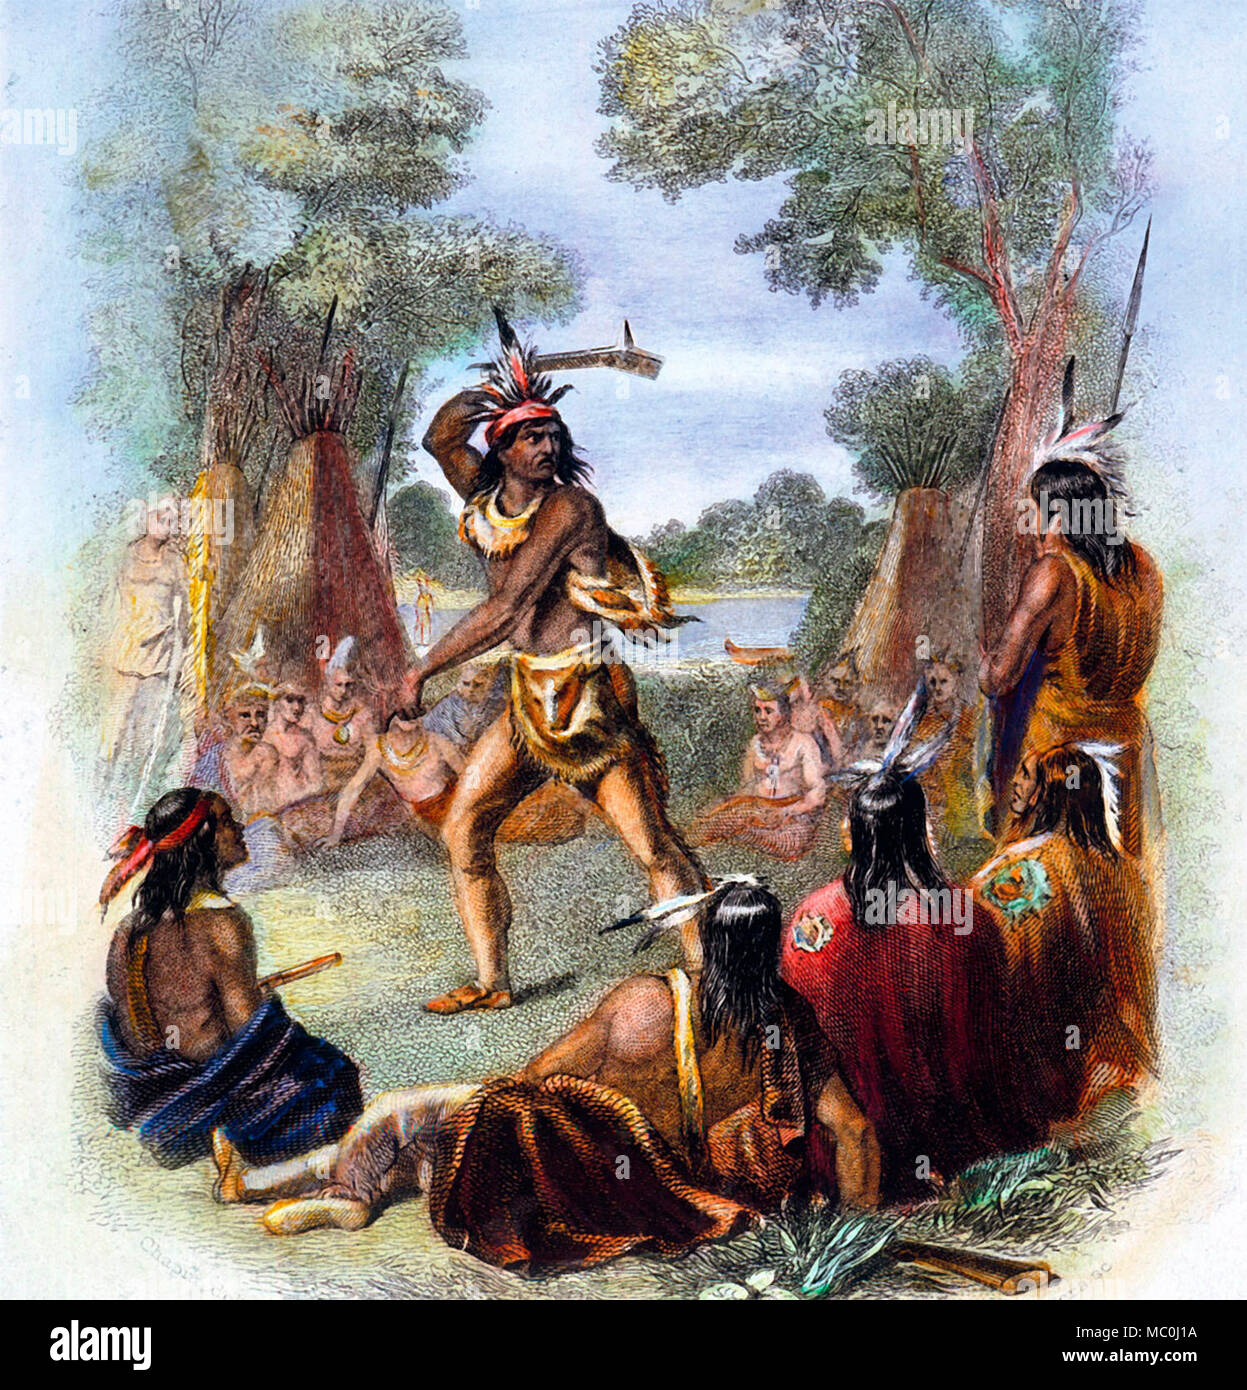 Chief Pontiac in 1763 taking up the war hatchet in the French and Indian War. Stock Photo